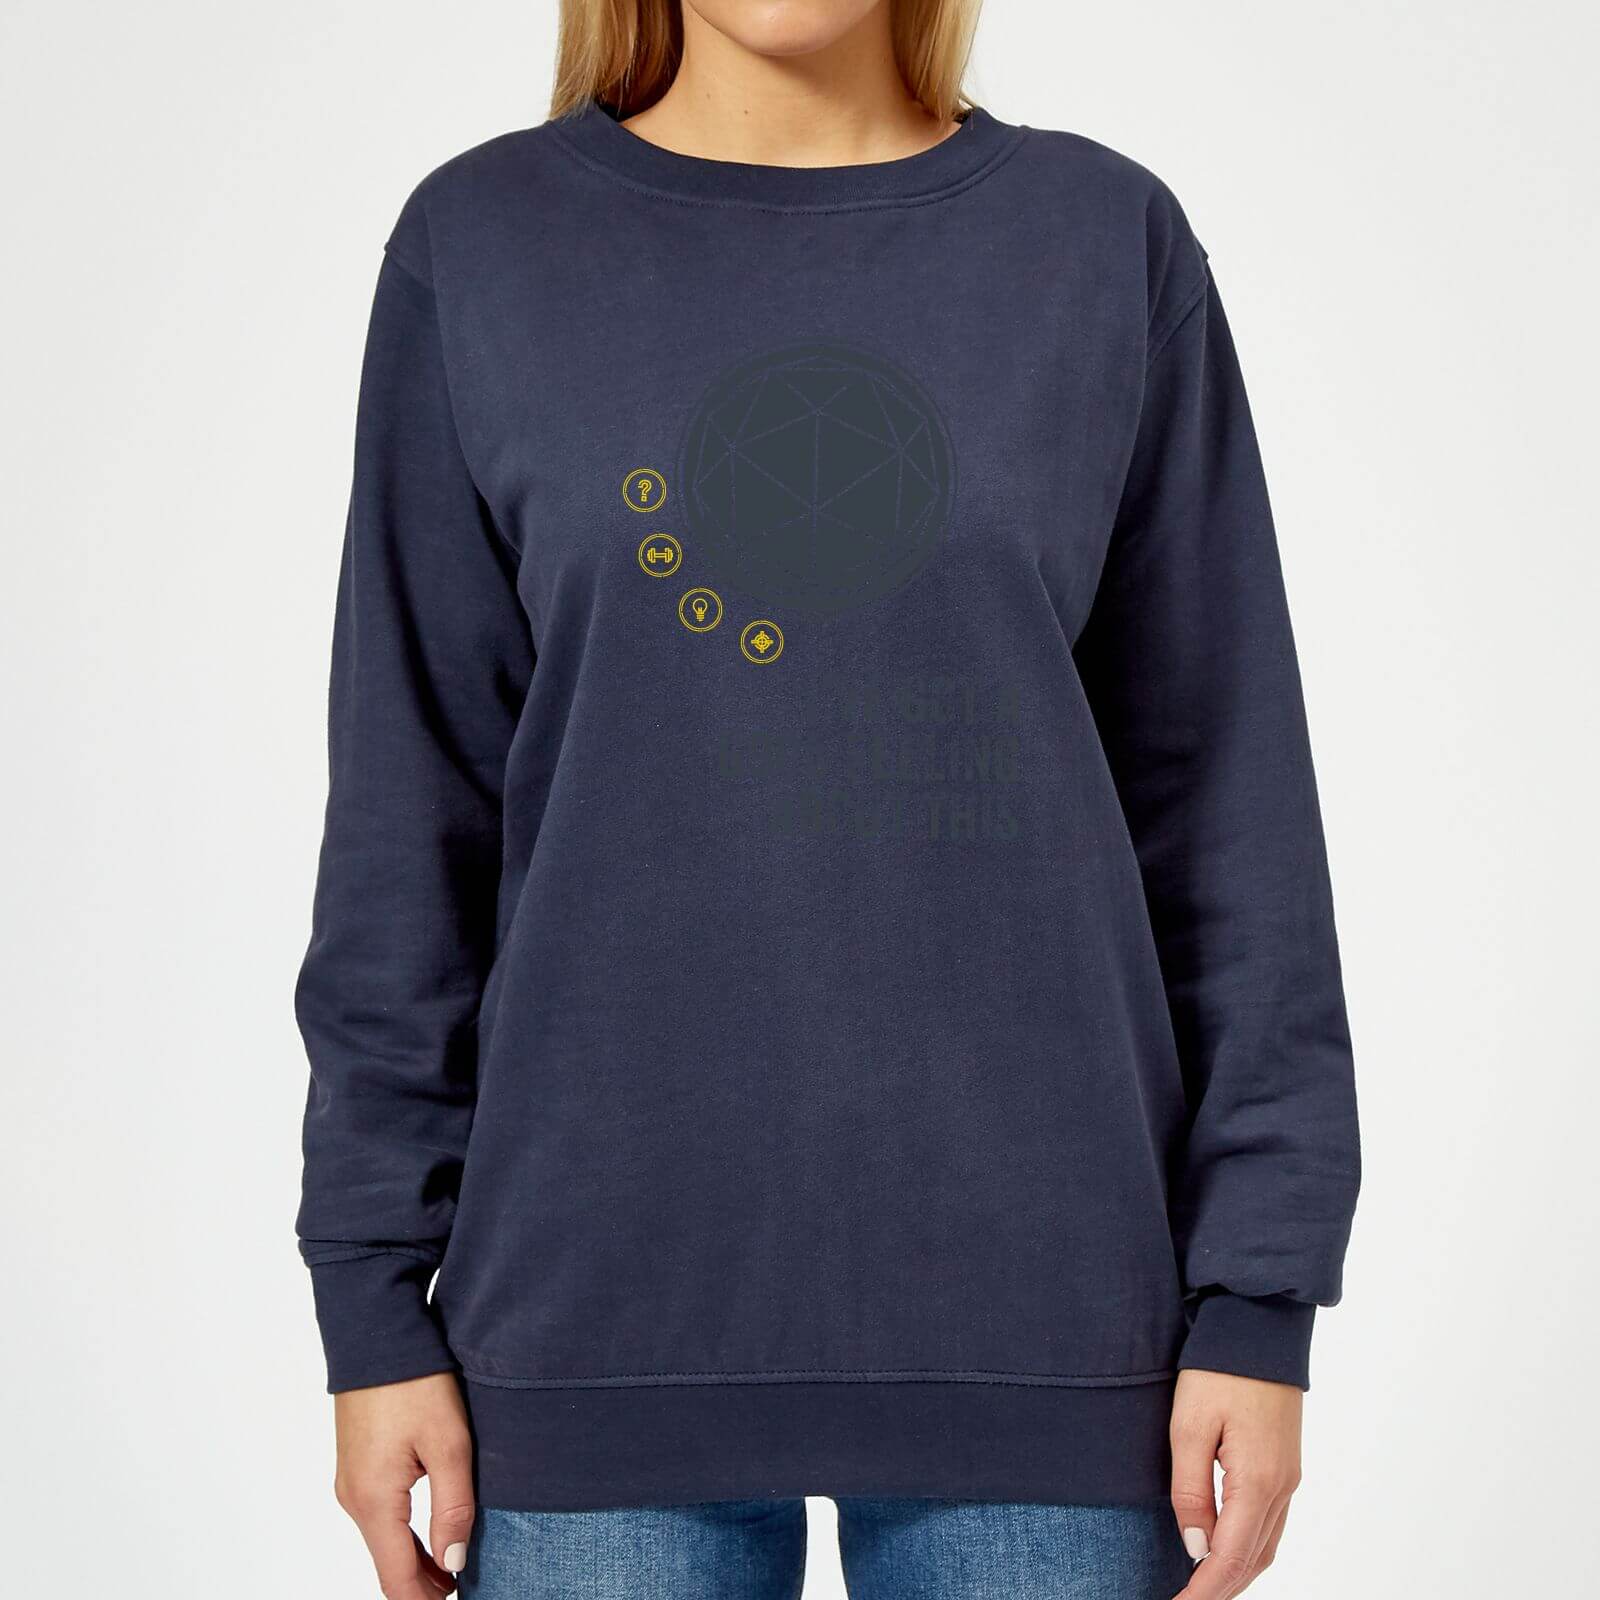 Crystal Maze I've Got A Good Feeling About This- Industrial Women's Sweatshirt - Navy - XS - Navy